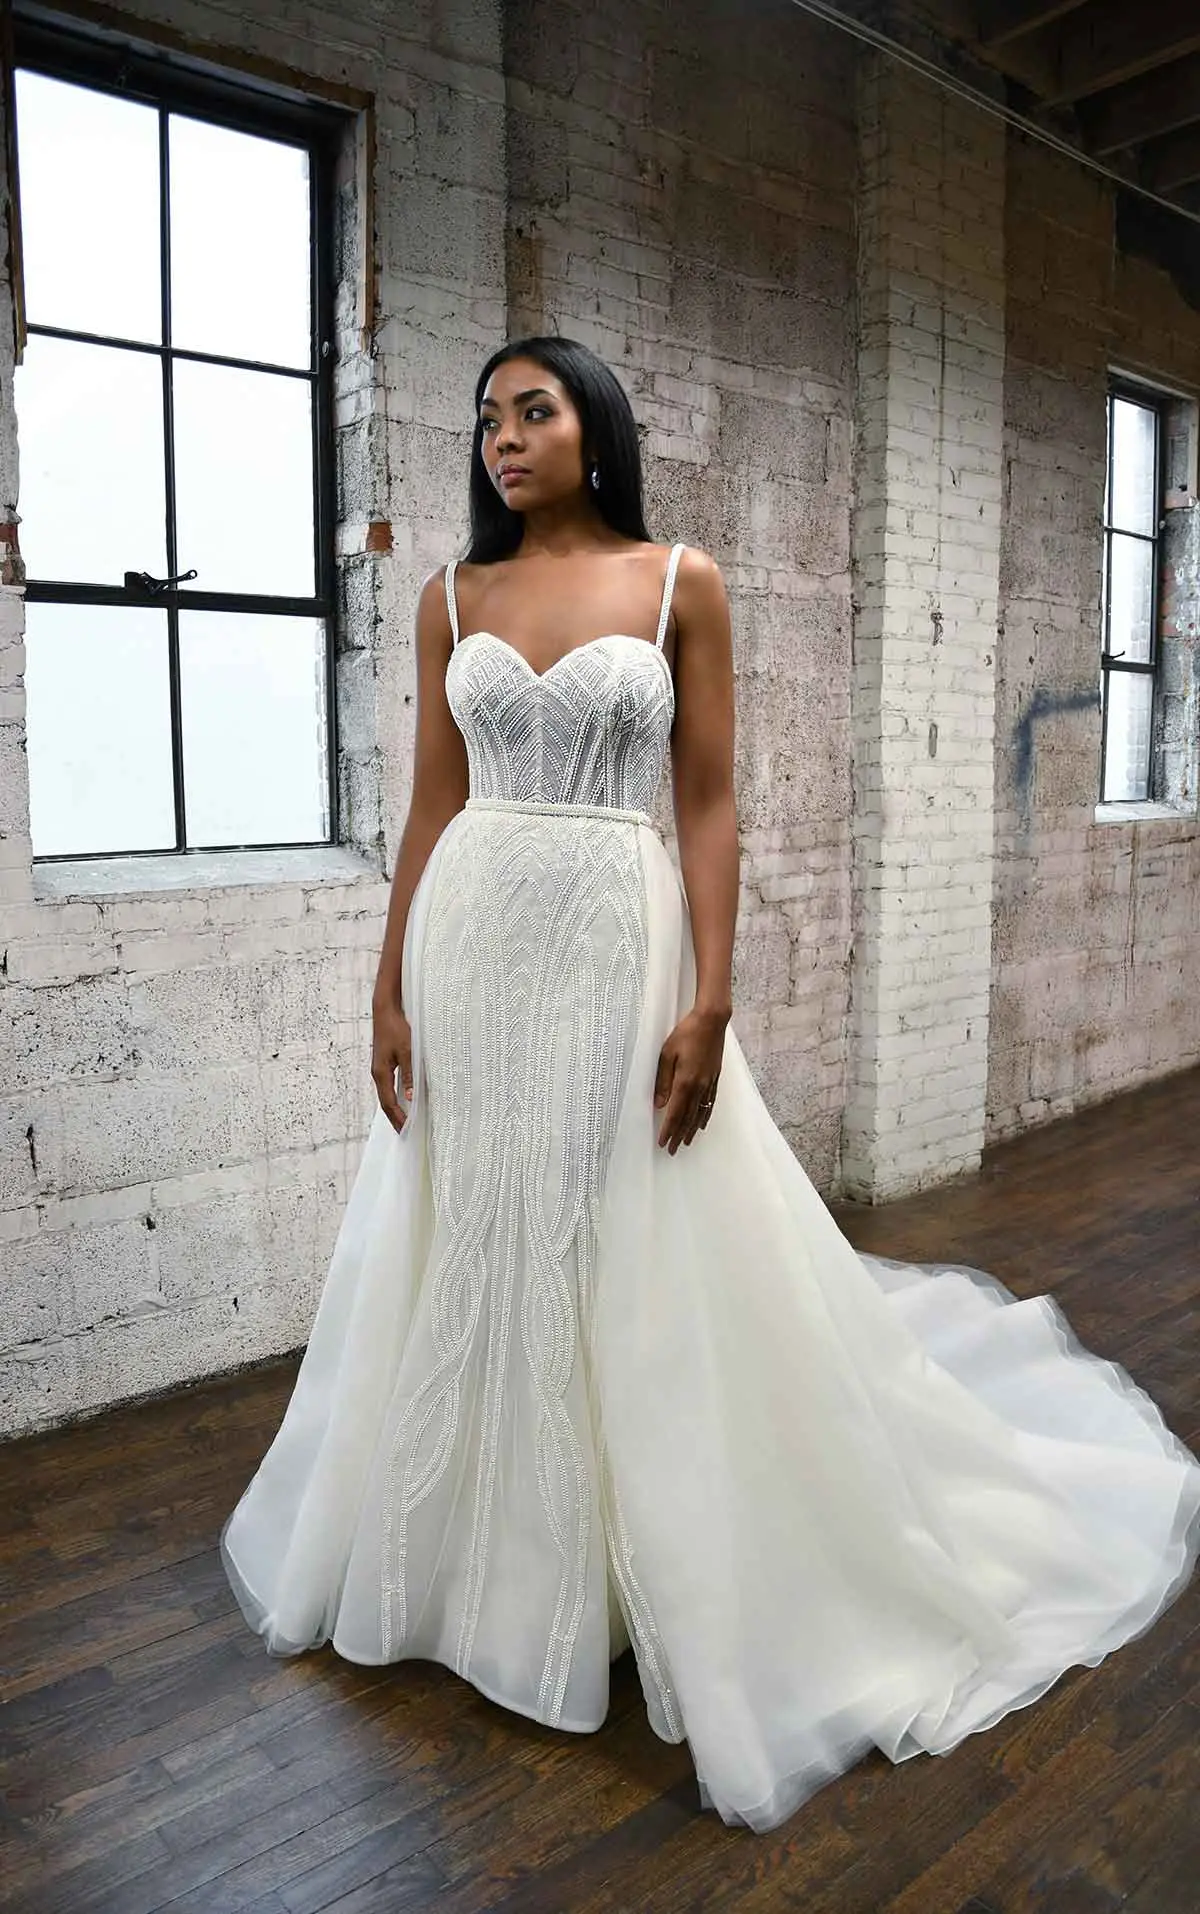 Sleek Fit-and-Flare Beaded Wedding Gown with Overskirt - LE1125  Beaded  wedding gowns, Wedding dress overskirt, Fit and flare wedding dress